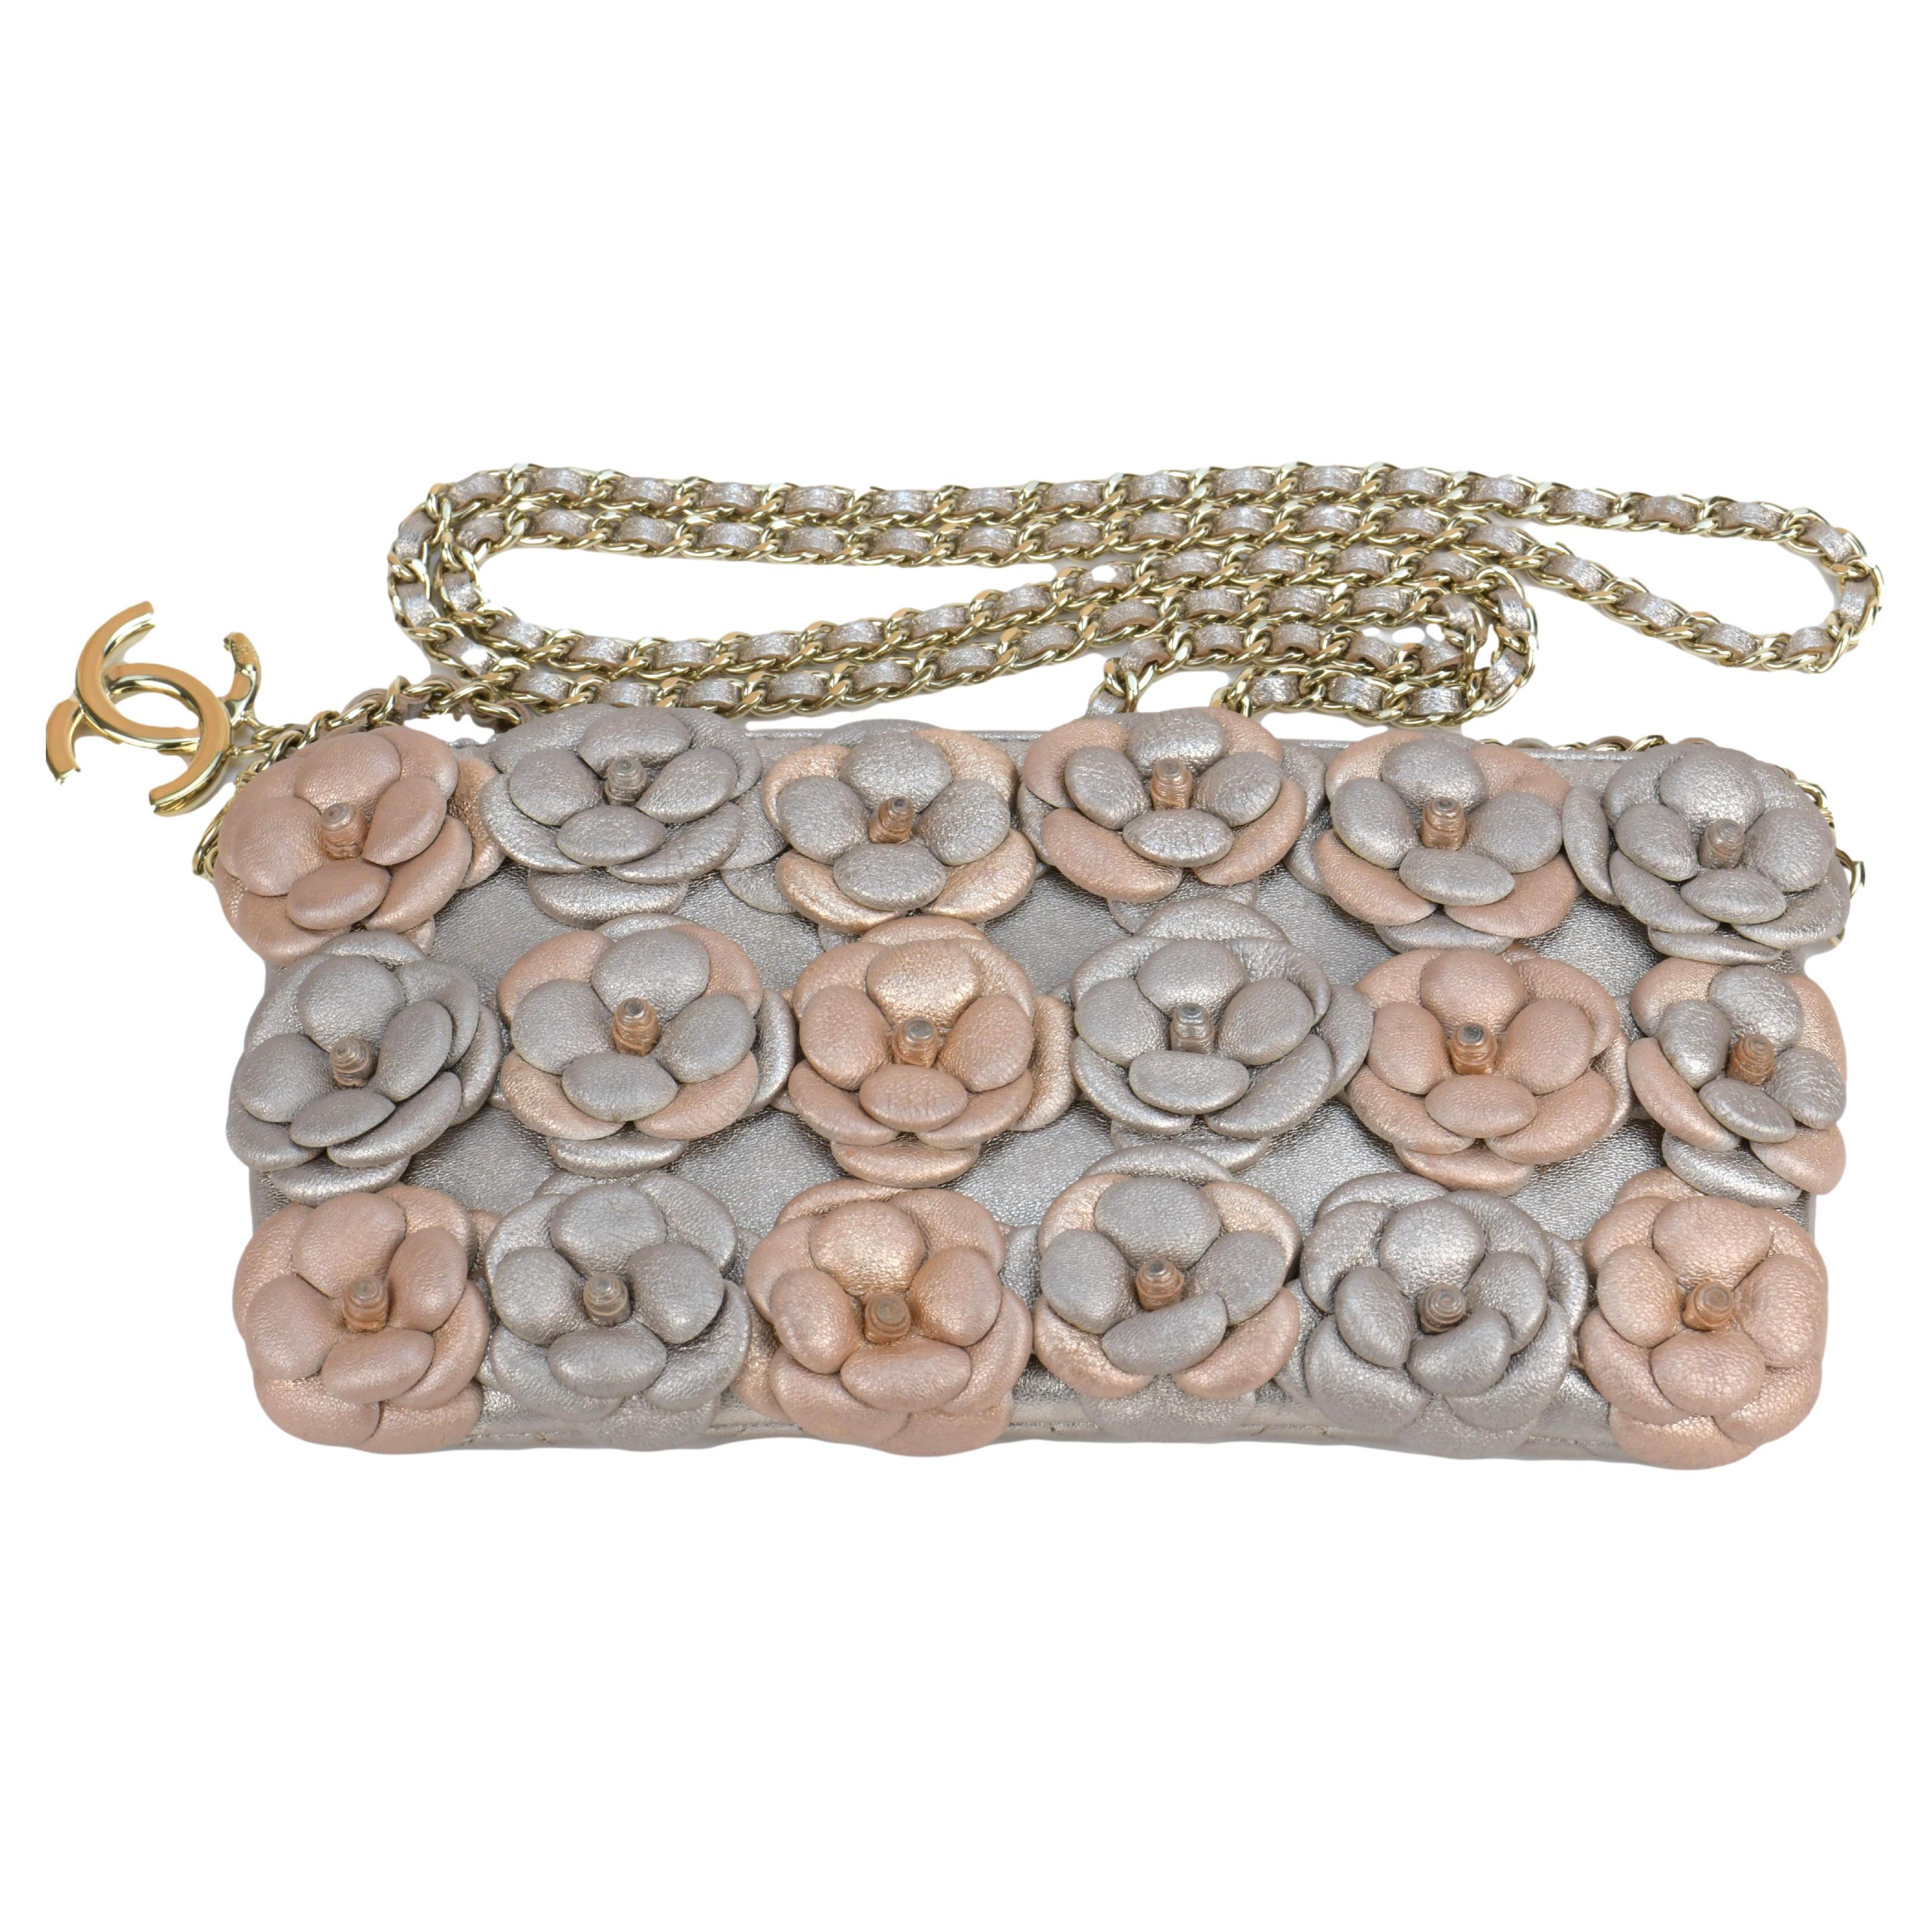 Chanel Limited Edition Camellia Embellished Lambskin Clutch with Chain For Sale